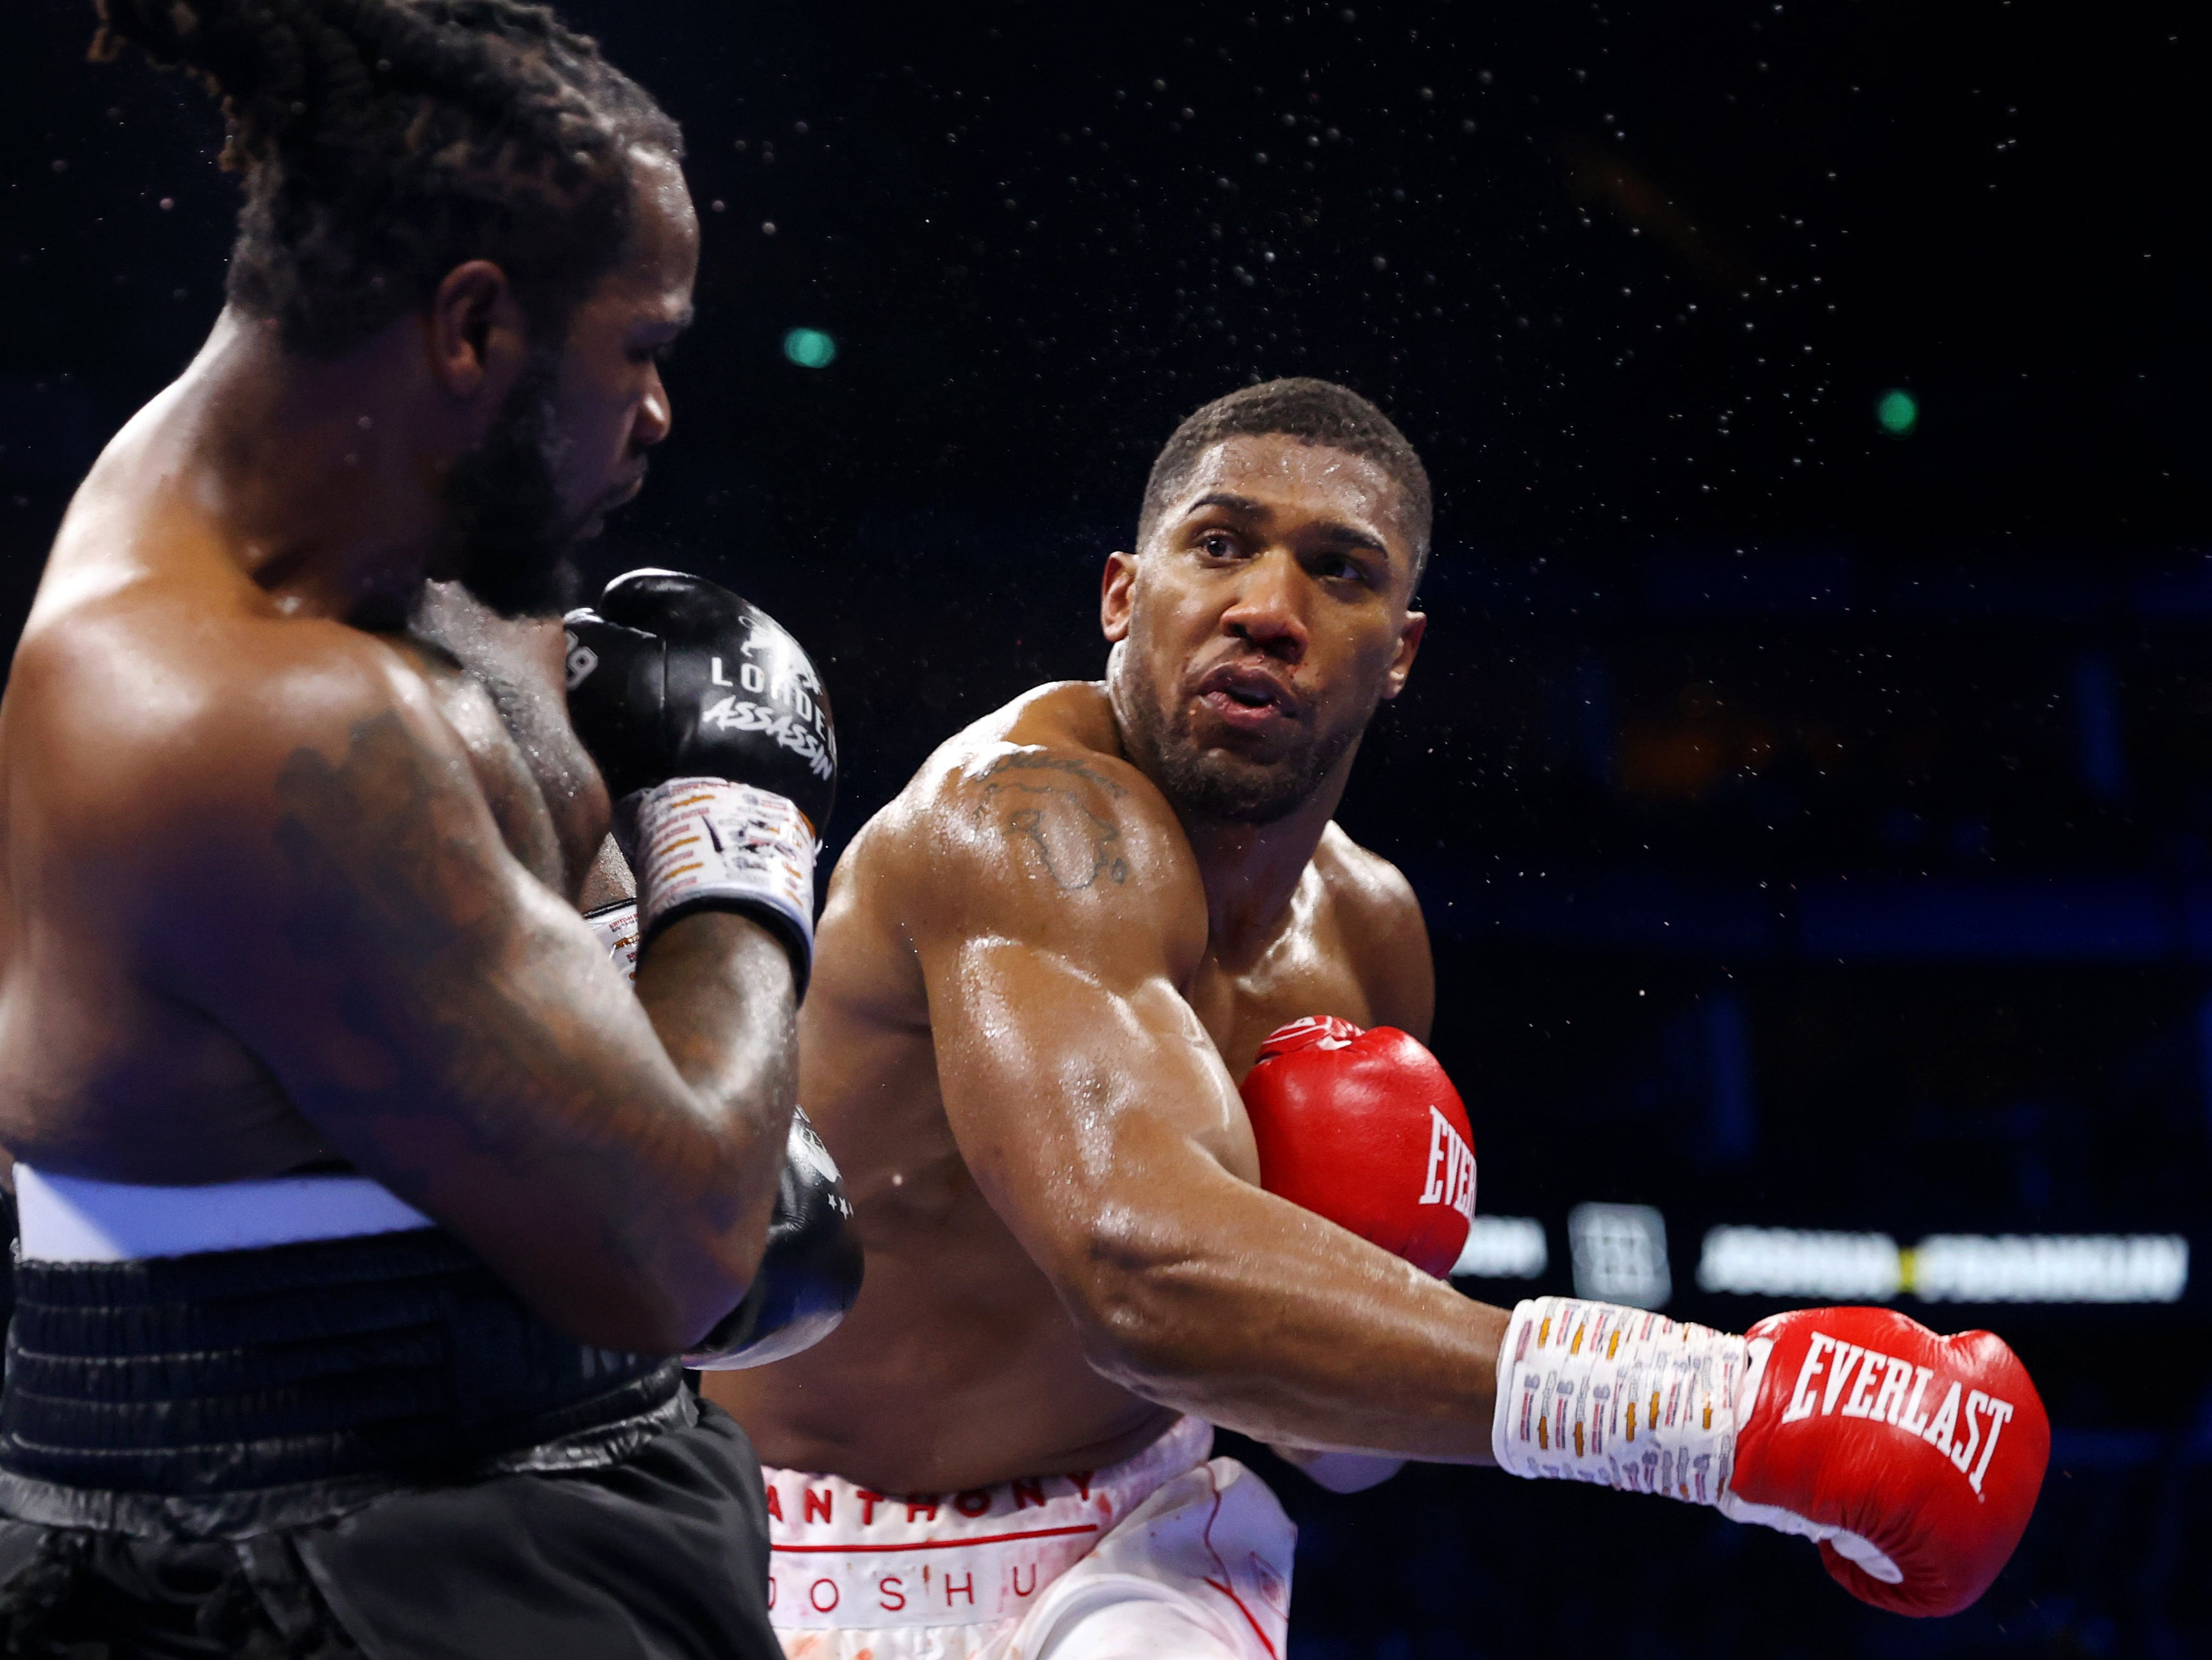 Anthony Joshua vs Jermaine Franklin LIVE Did AJ win? The Independent